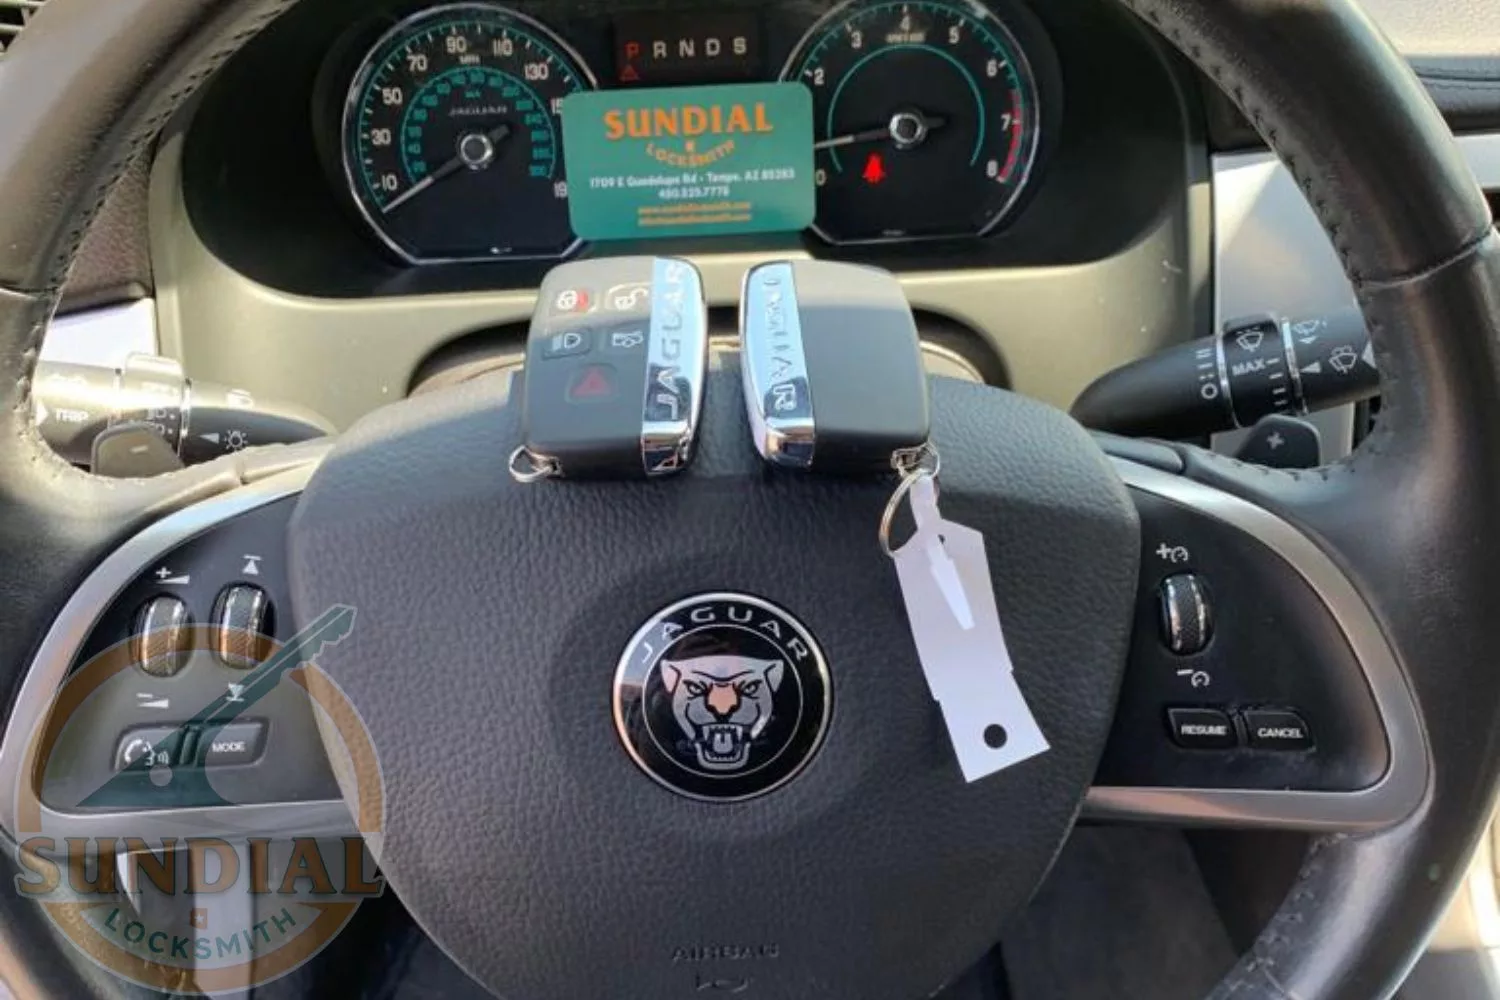 Close-up view of a Jaguar steering wheel showcasing two Jaguar key fobs, dashboard controls, and a business card for 'SUNDIAL Locksmith'.